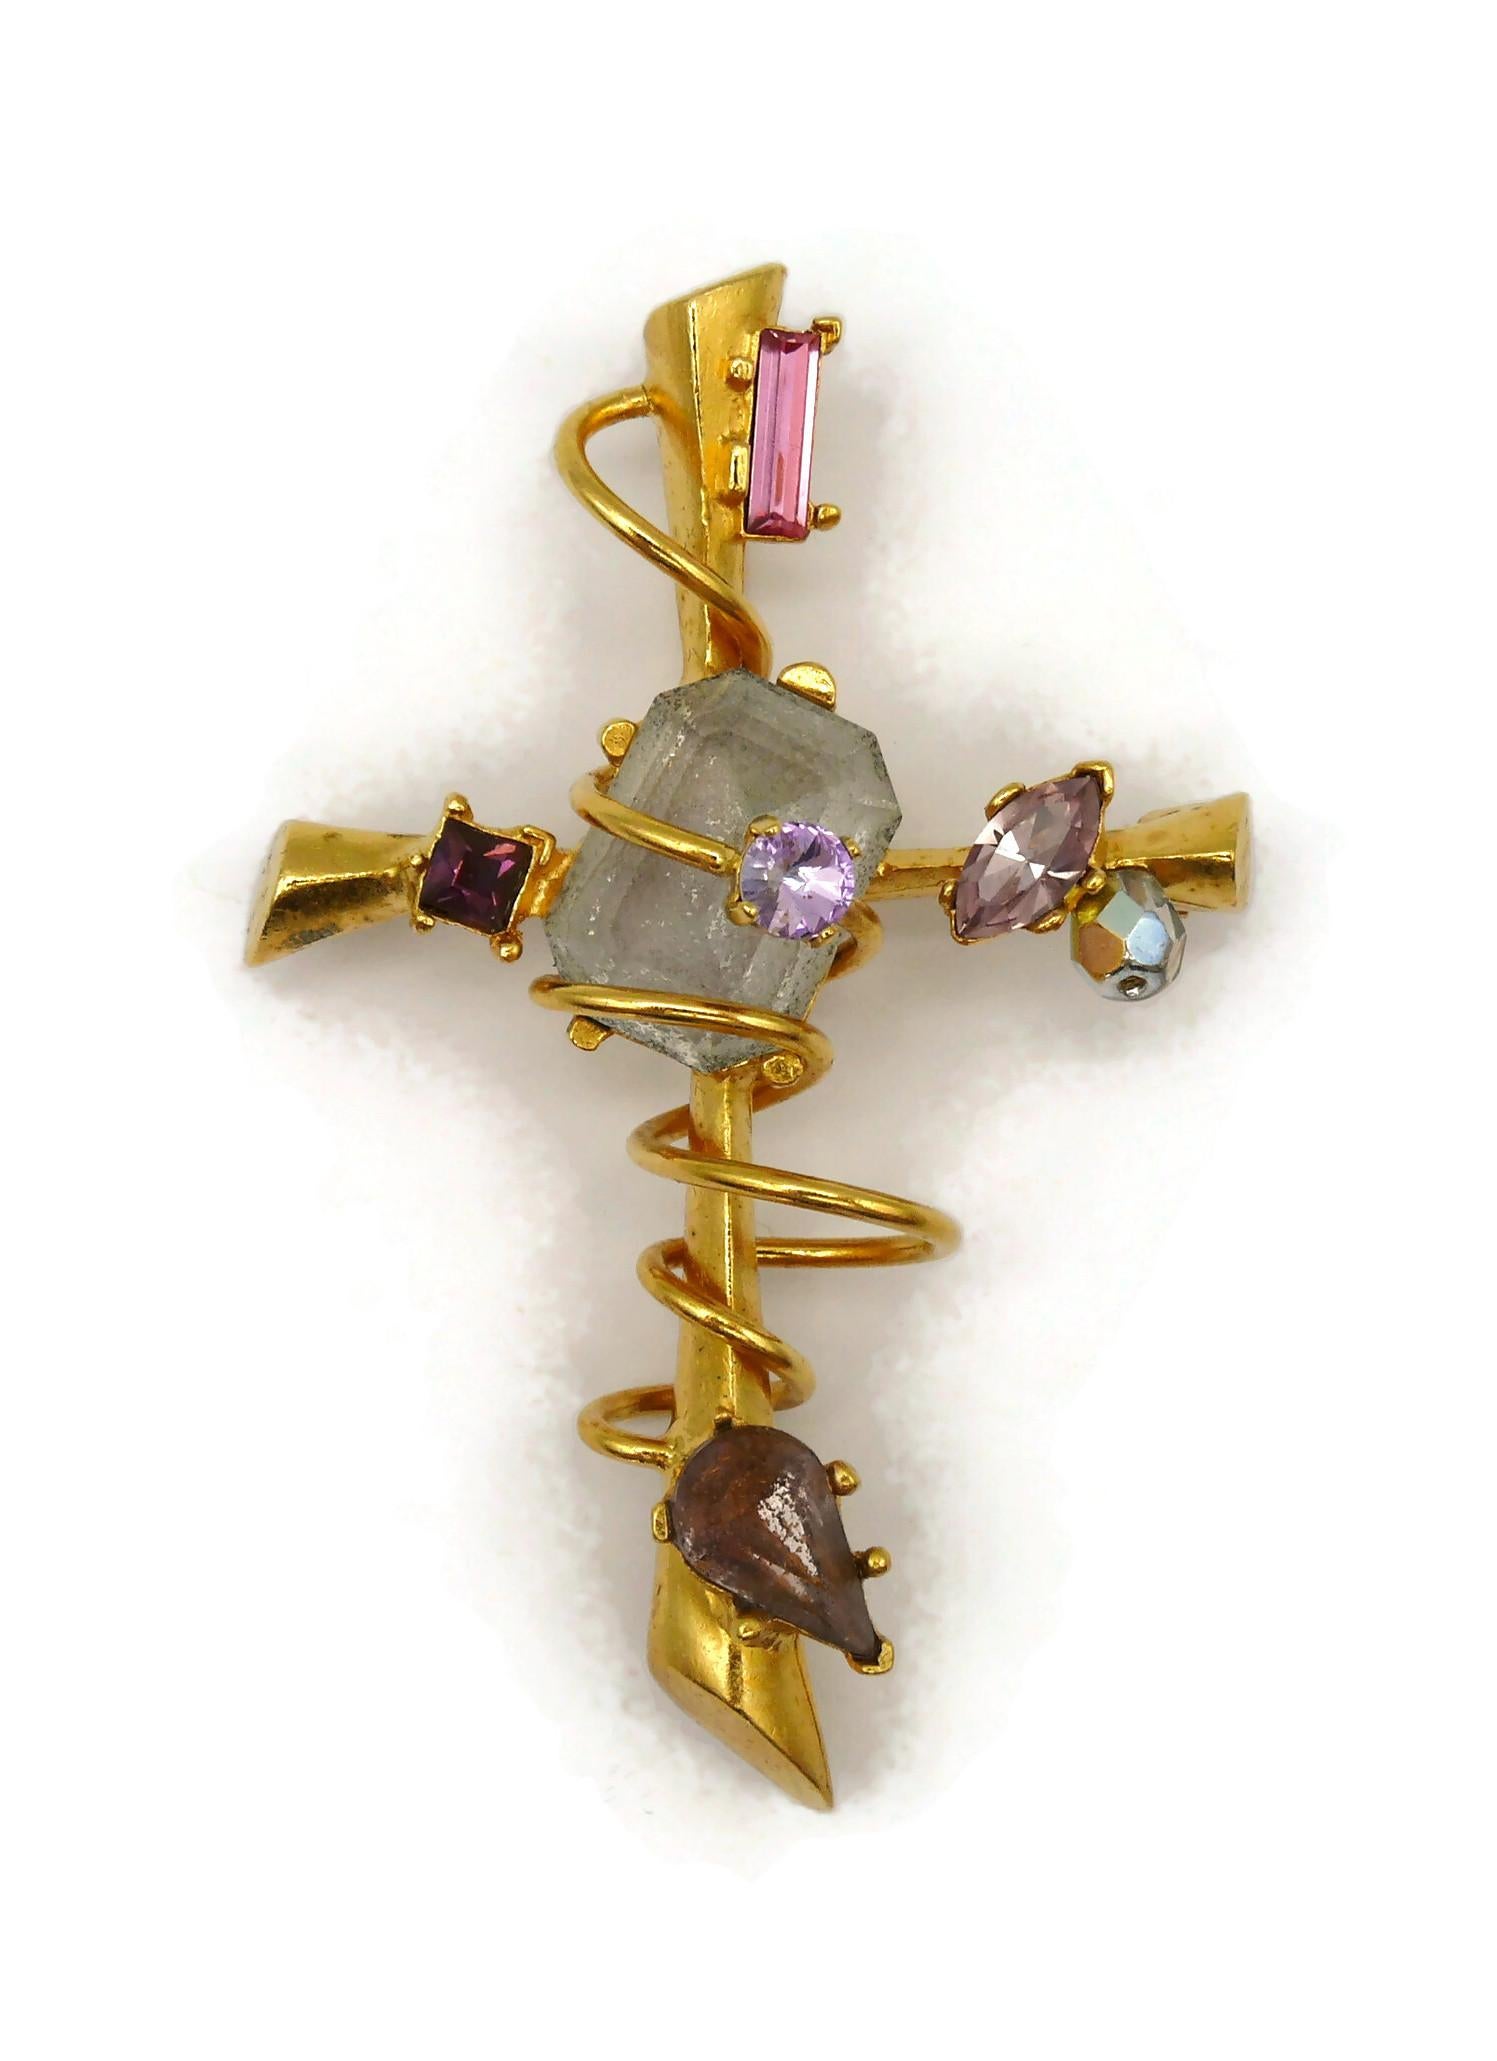 CHRISTIAN LACROIX Vintage Jewelled Gold Tone Cross Brooch Pendant For Sale 1